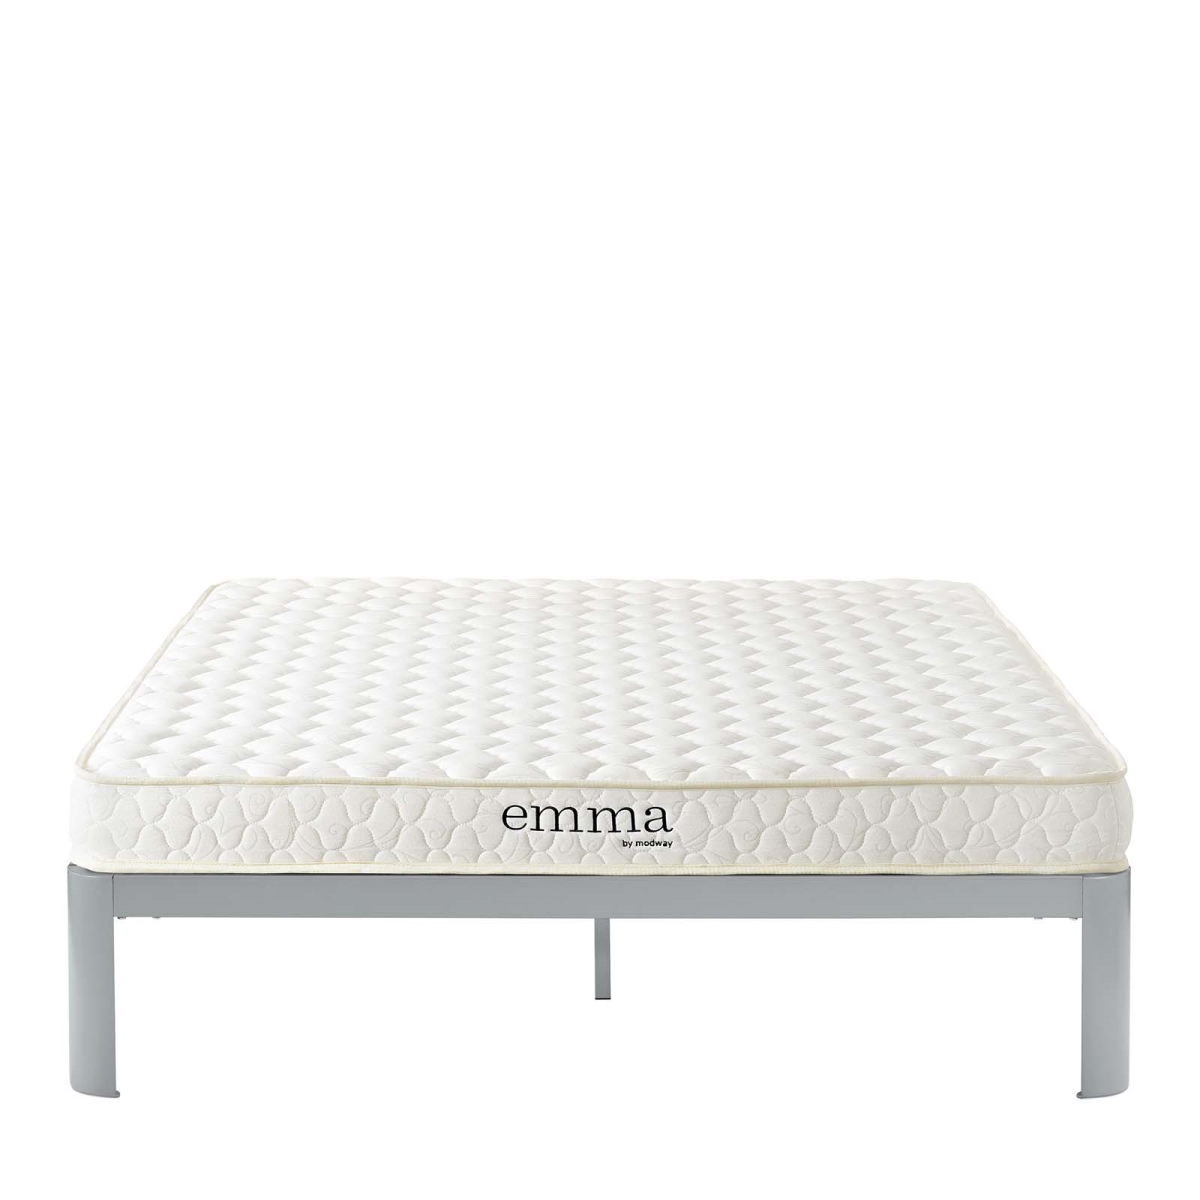 Picture of Modway Furniture MOD-5734-WHI 15.5 x 31.5 x 31.5 in. 6 in. Emma Full XL Mattress